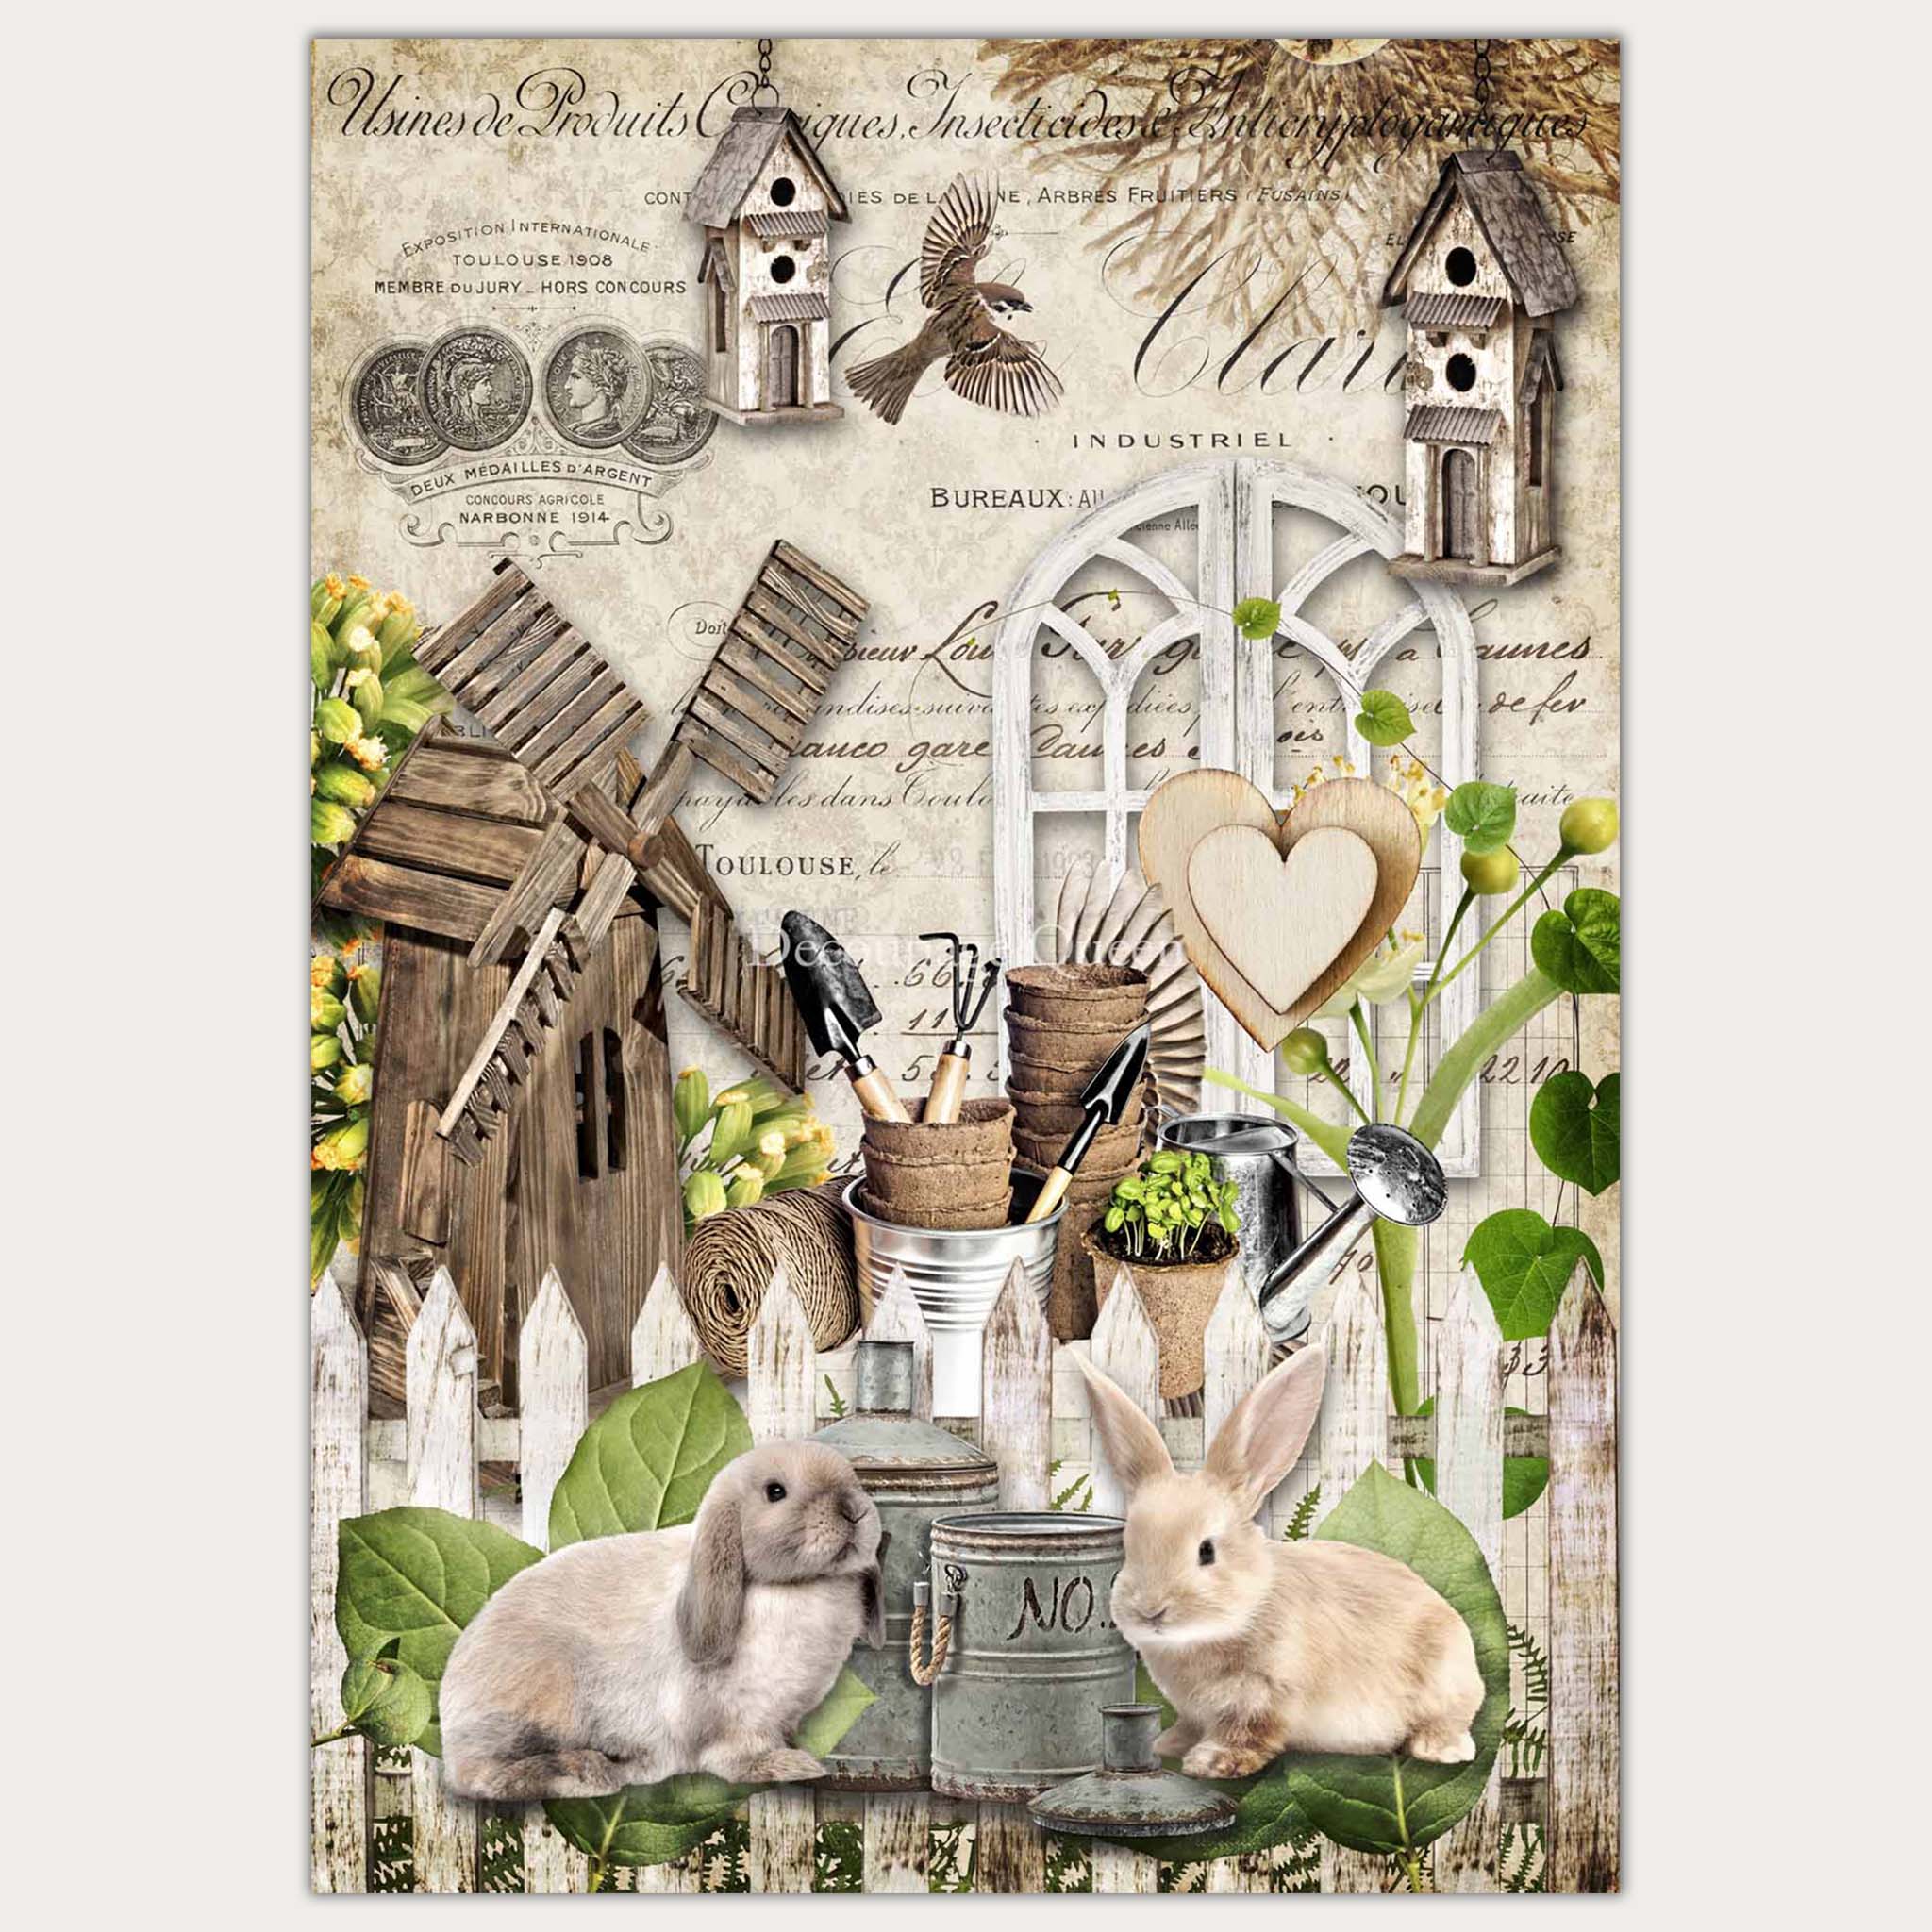 A3 rice paper design that features a collage of bunnies, bird houses, a wood windmill, and other garden accessories against a vintage parchment background. White borders are on the sides.